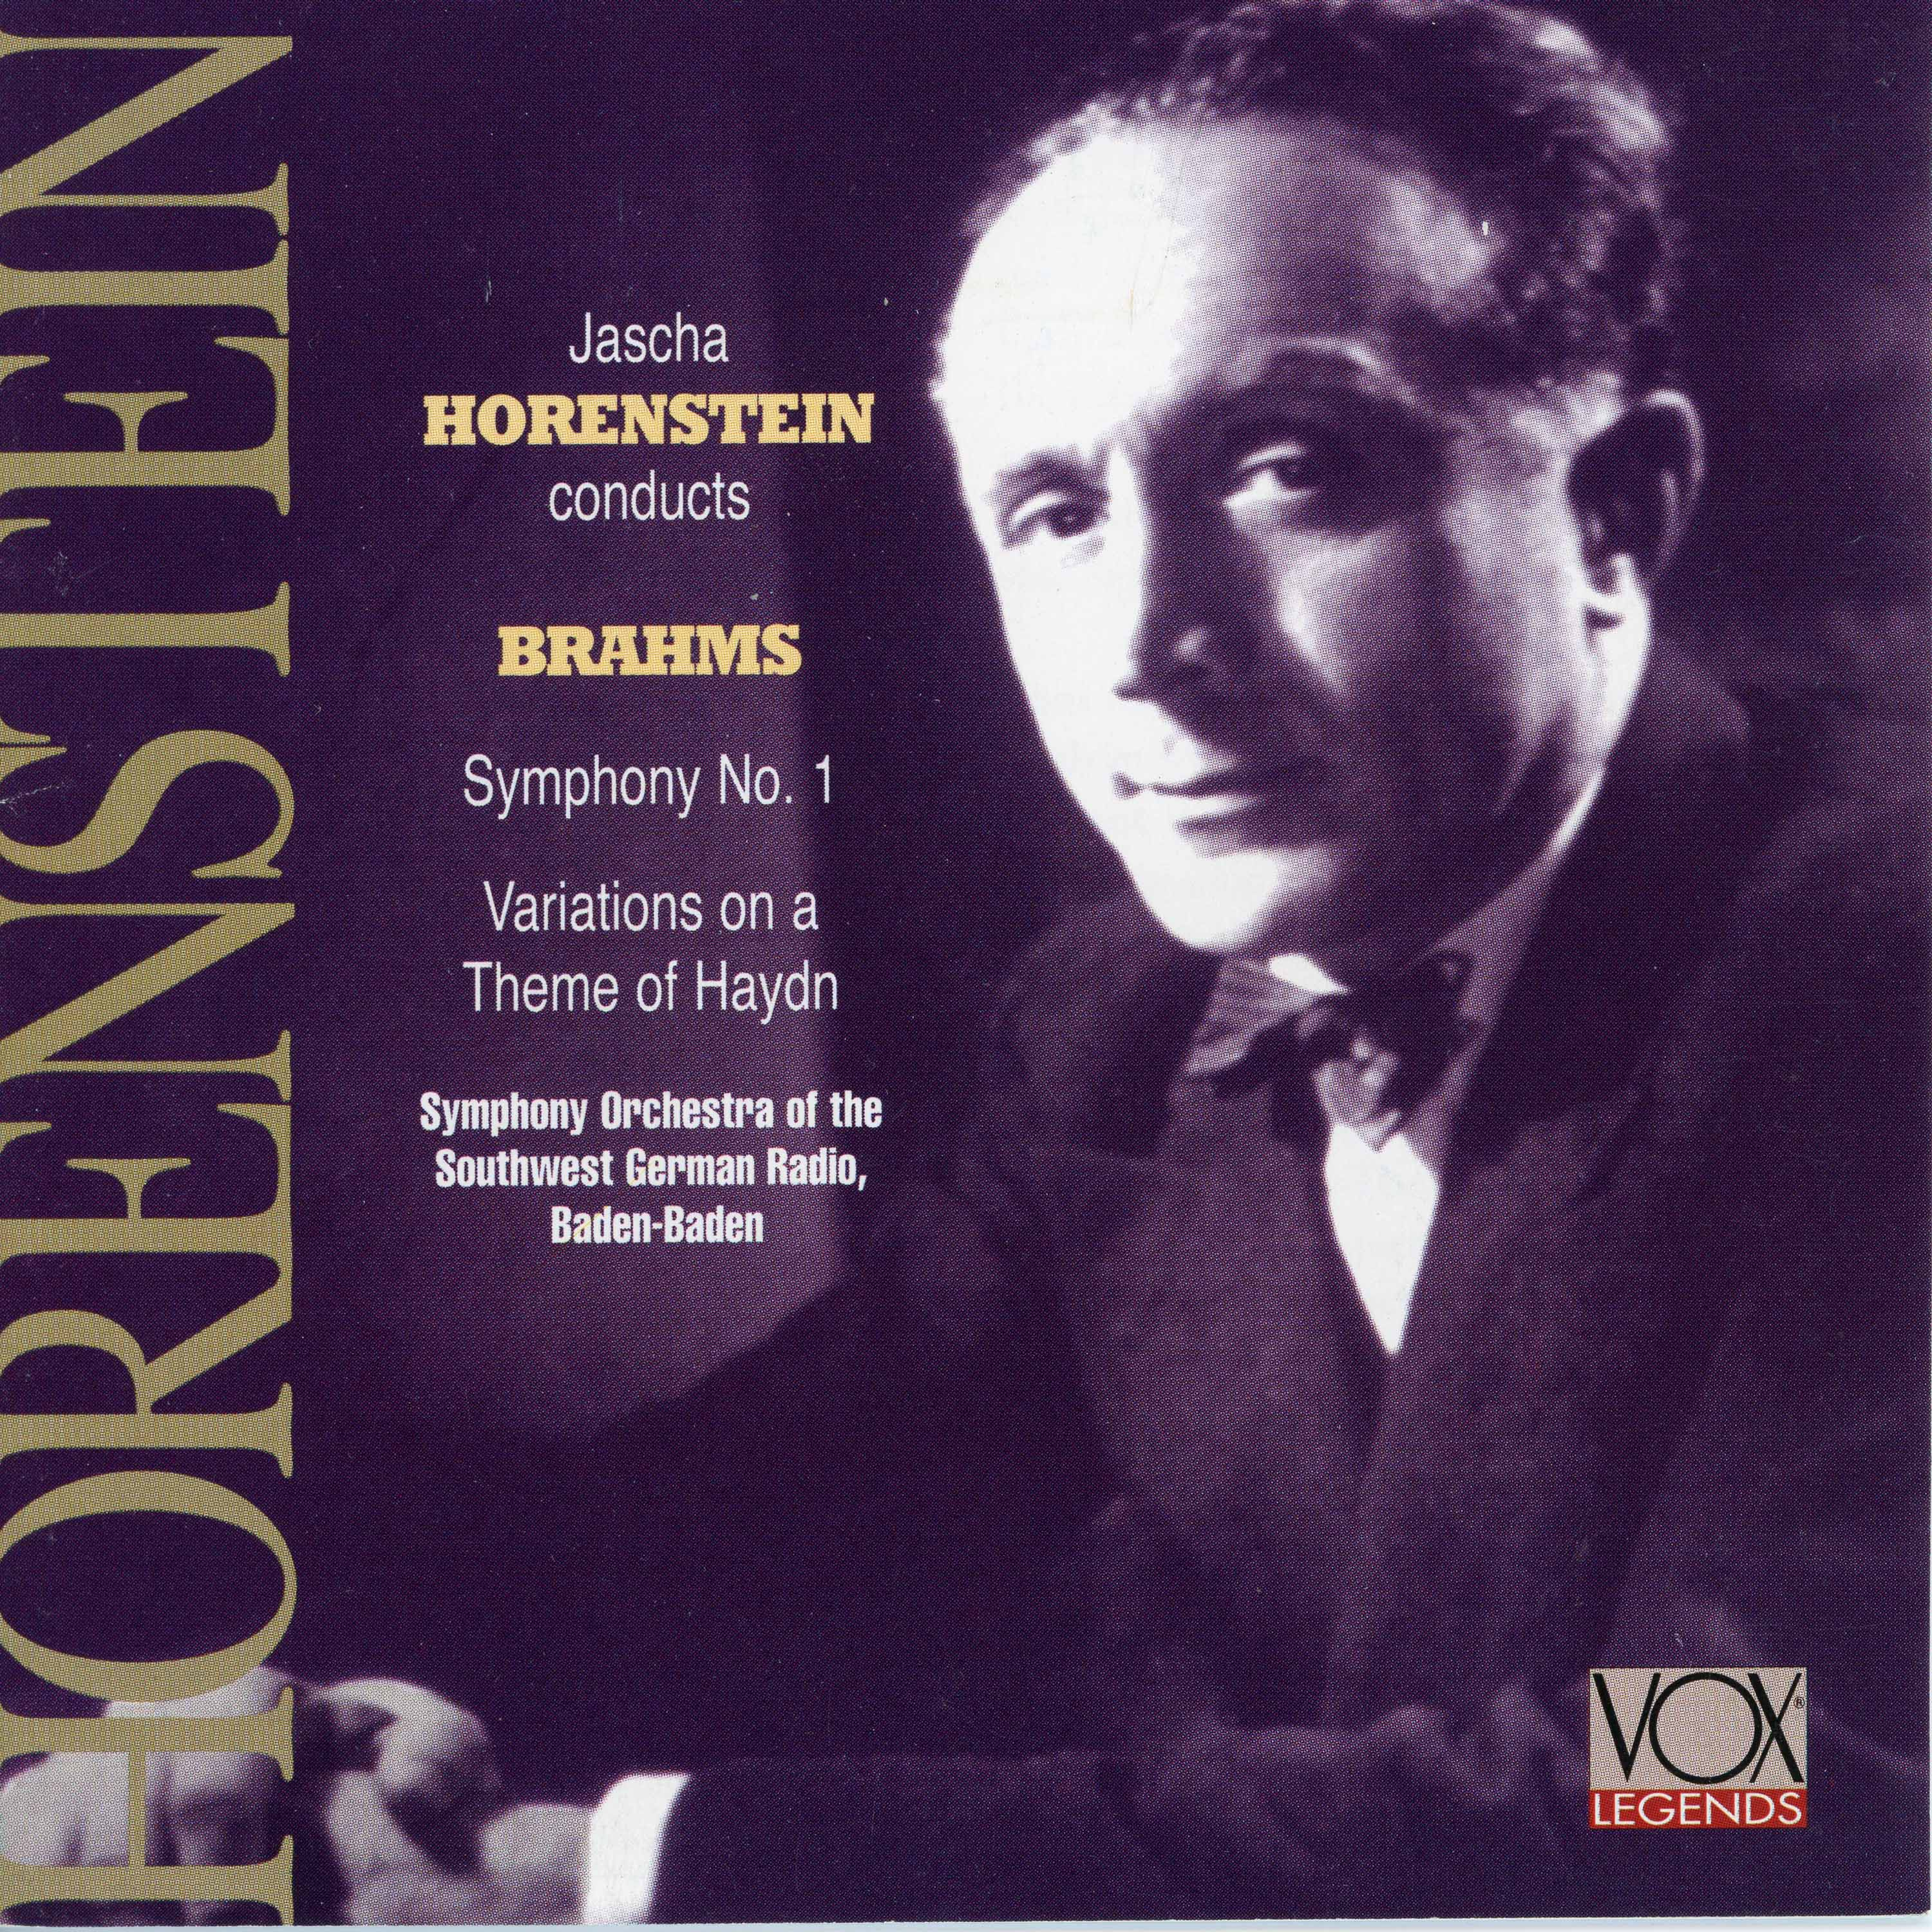 Variations on a Theme by Haydn, Op. 56a "St. Anthony Variations":Variations on a Theme by Haydn, Op. 56a "St. Anthony Variations": Var. 7, Grazioso